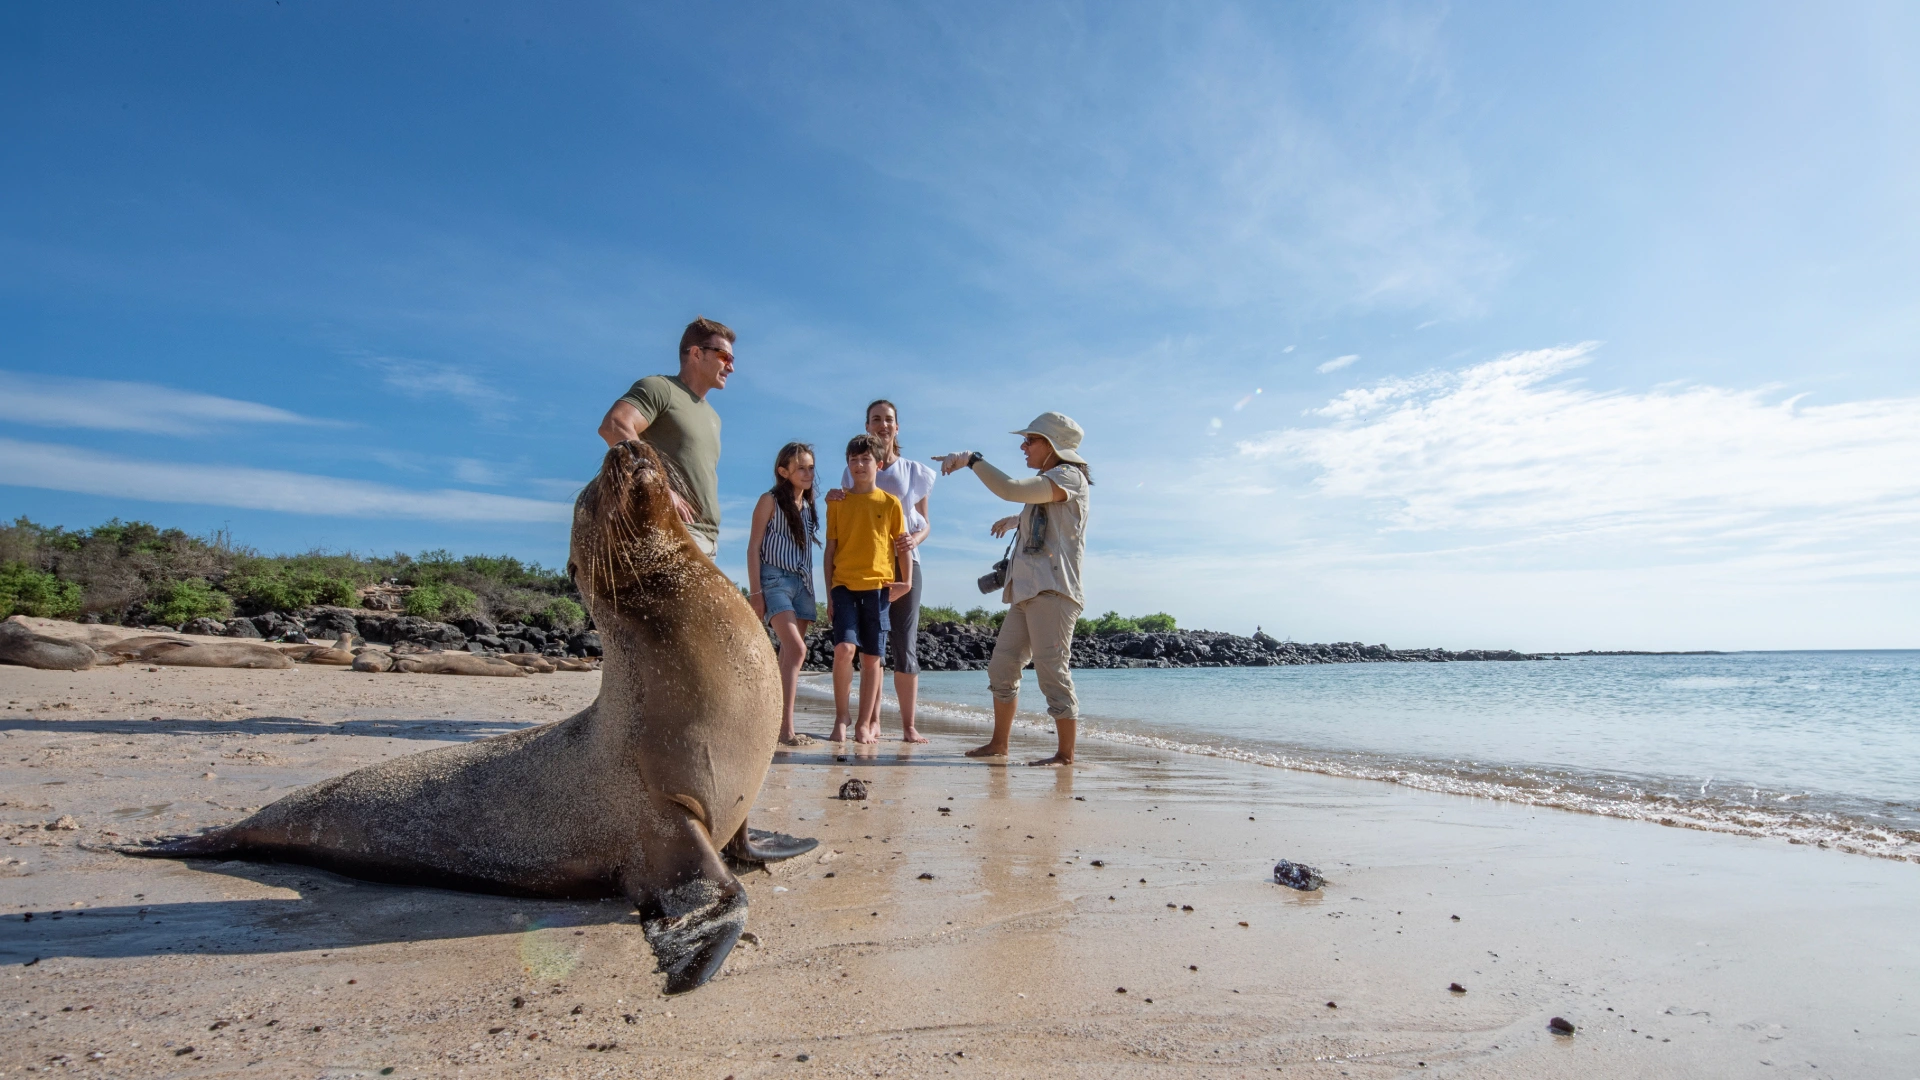 The Galapagos Islands: the ultimate spring break destination